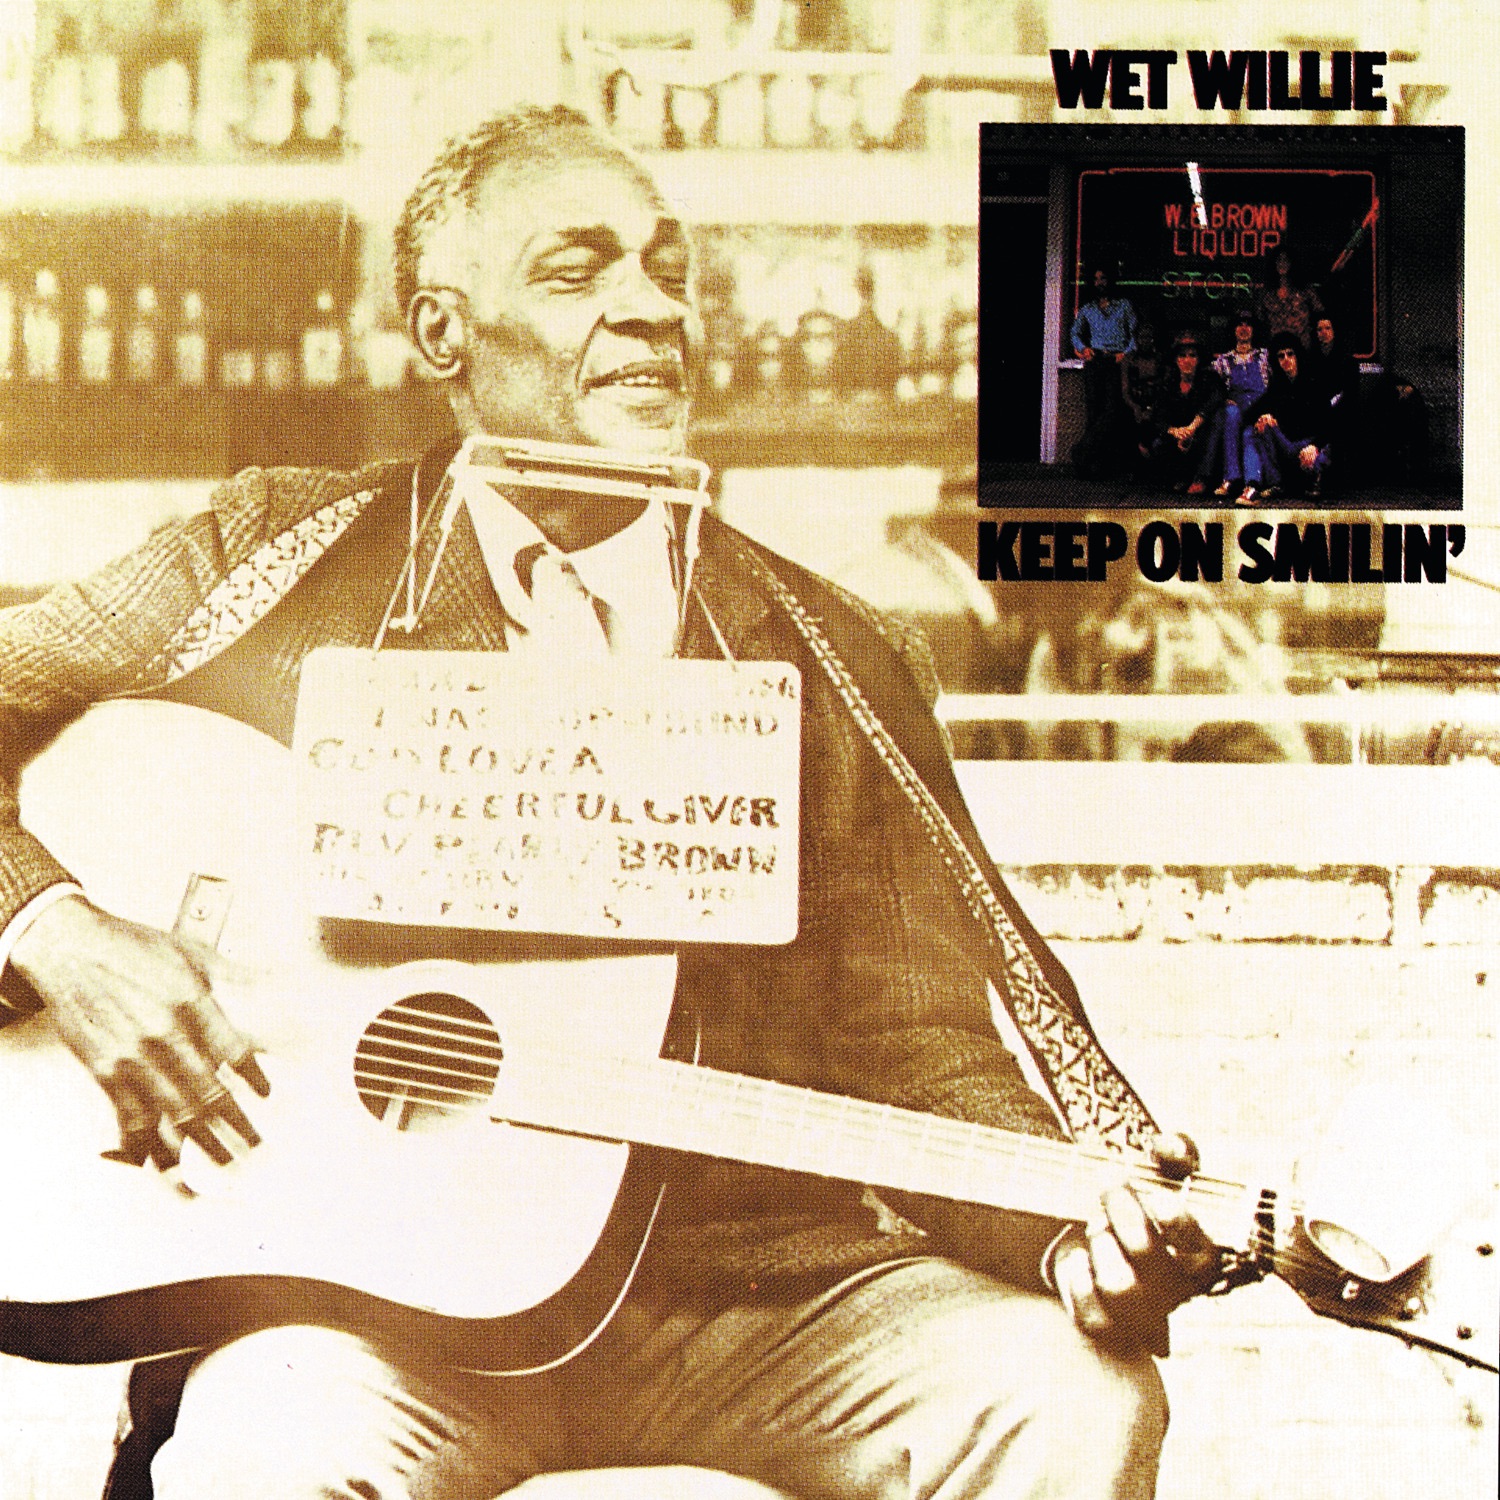 Art for Keep On Smilin' by Wet Willie